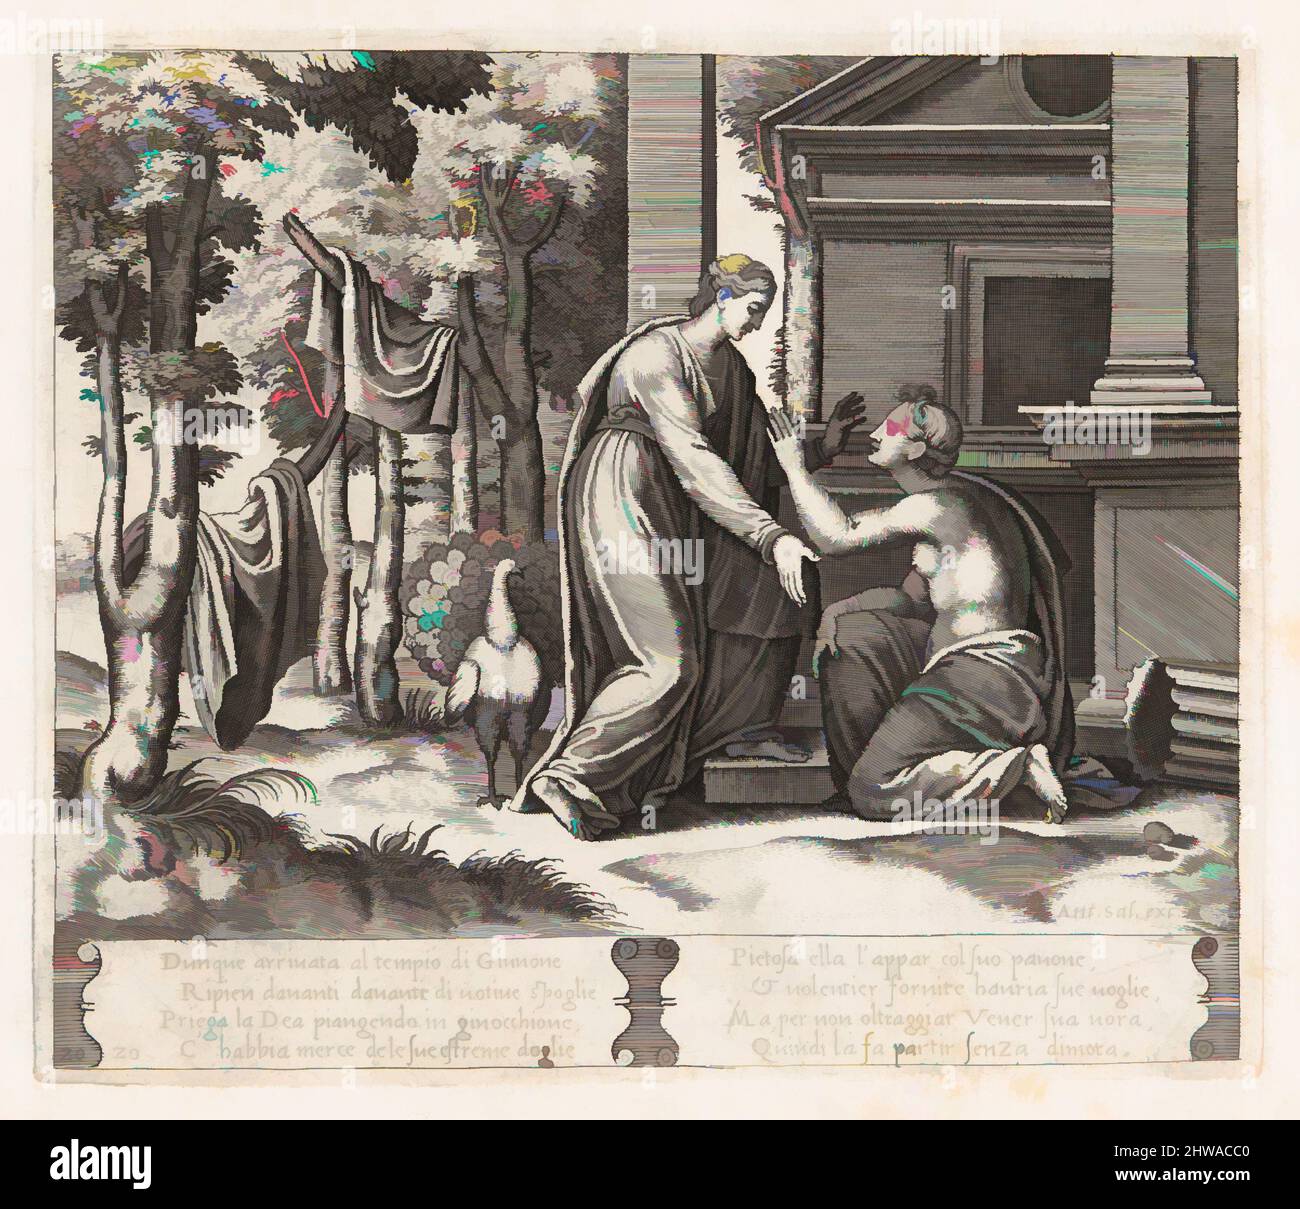 Art inspired by Drawings and Prints, Print, Plate 20: Juno, standing at left, sends away Psyche, who kneels before her, from the Story of Cupid, Classic works modernized by Artotop with a splash of modernity. Shapes, color and value, eye-catching visual impact on art. Emotions through freedom of artworks in a contemporary way. A timeless message pursuing a wildly creative new direction. Artists turning to the digital medium and creating the Artotop NFT Stock Photo